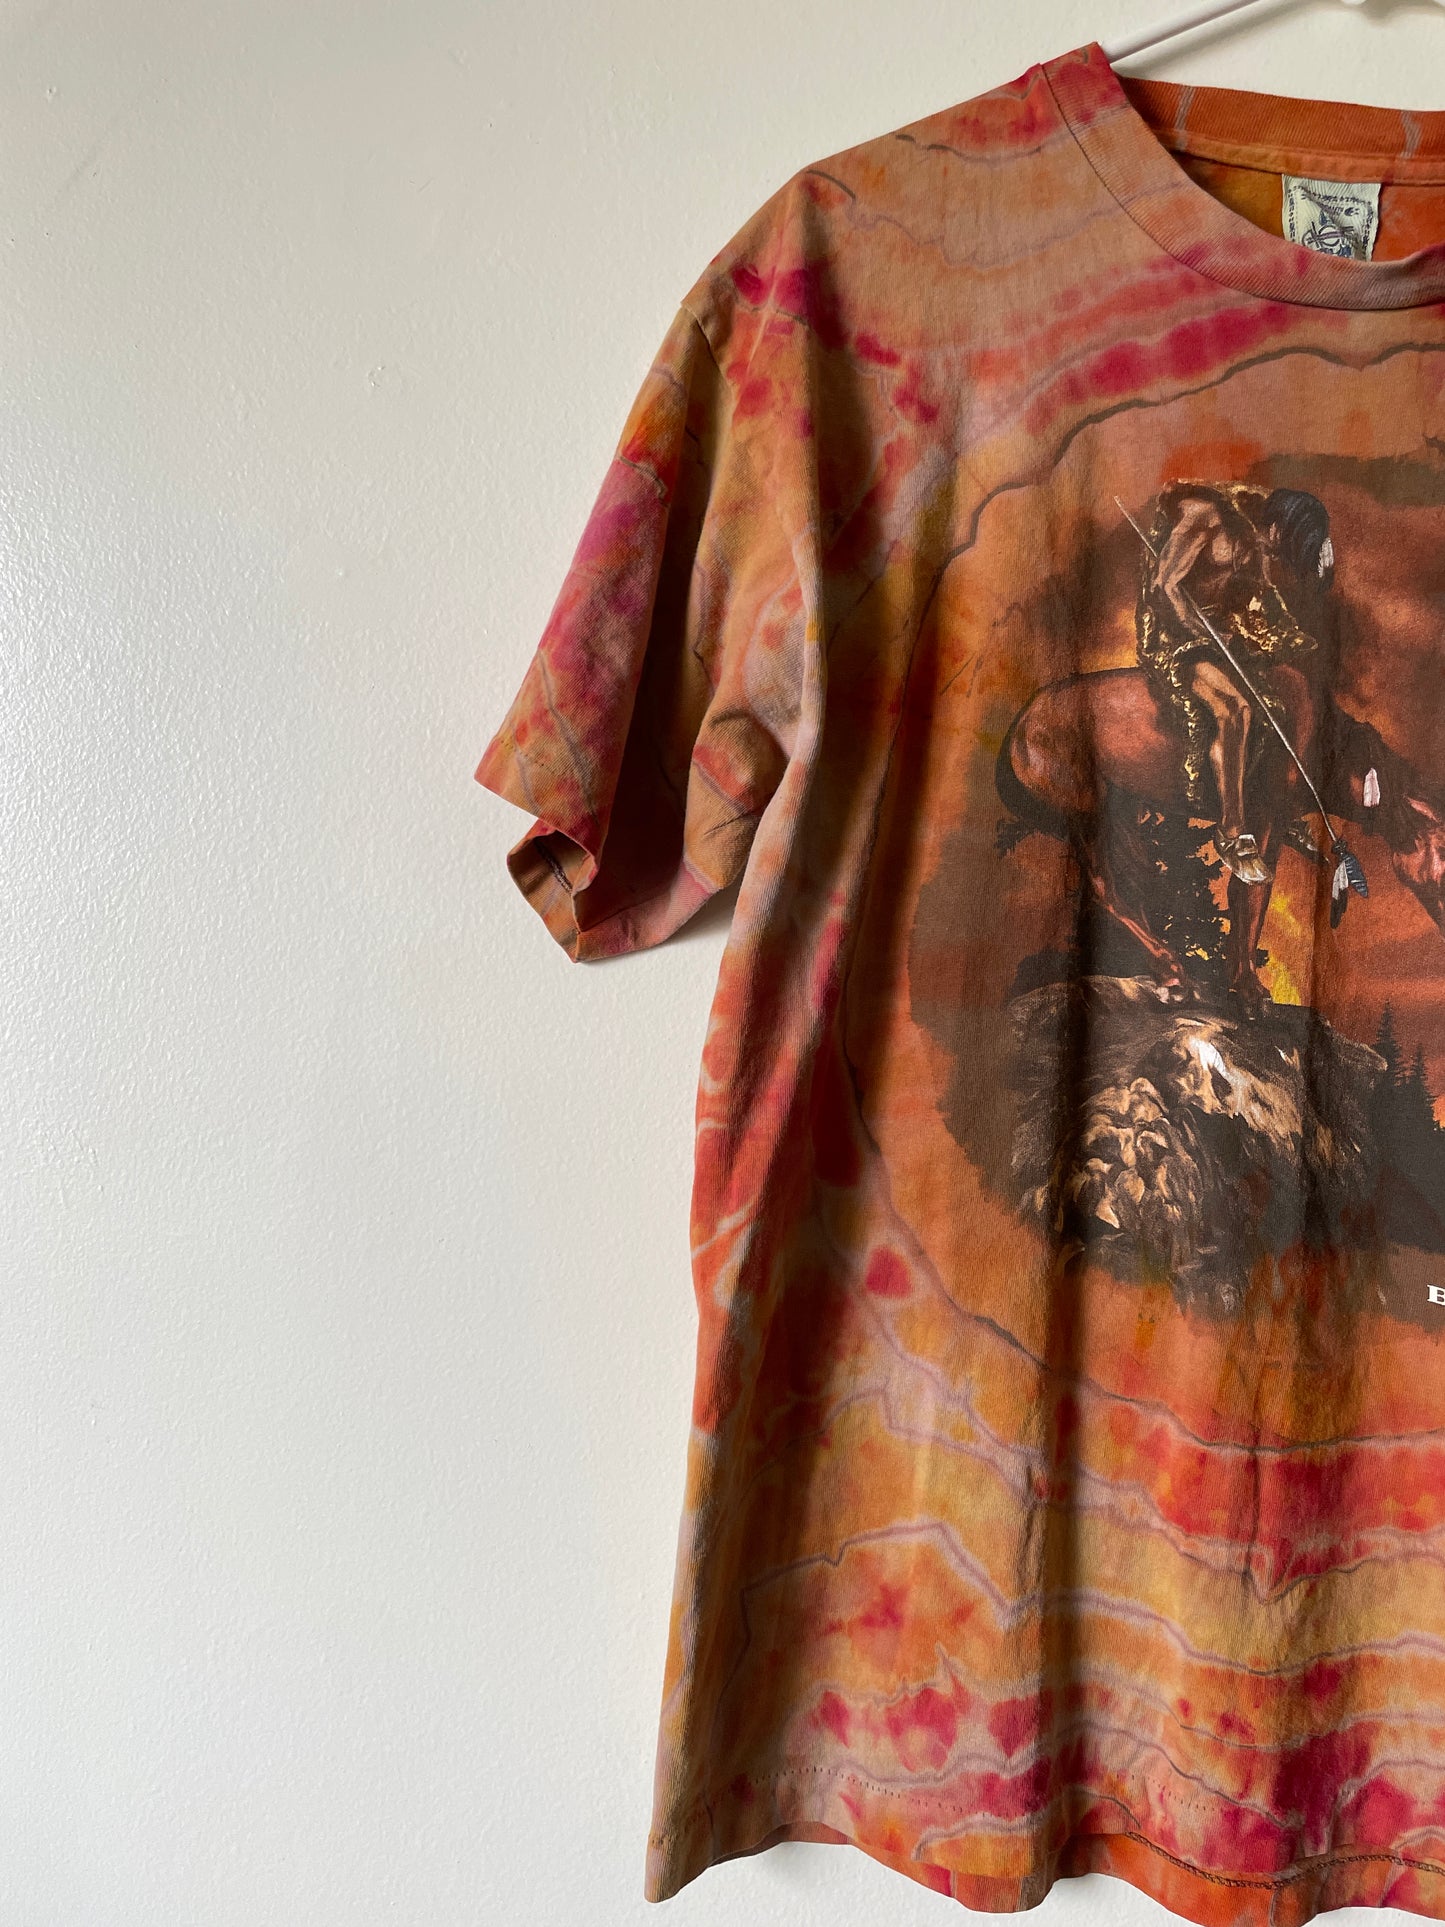 Large Men's Vintage Black Hills End of the Trail Handmade Geode Tie Dye Short Sleeve T-Shirt | One-Of-a-Kind Upcycled Brown and Orange Tie Dye Top